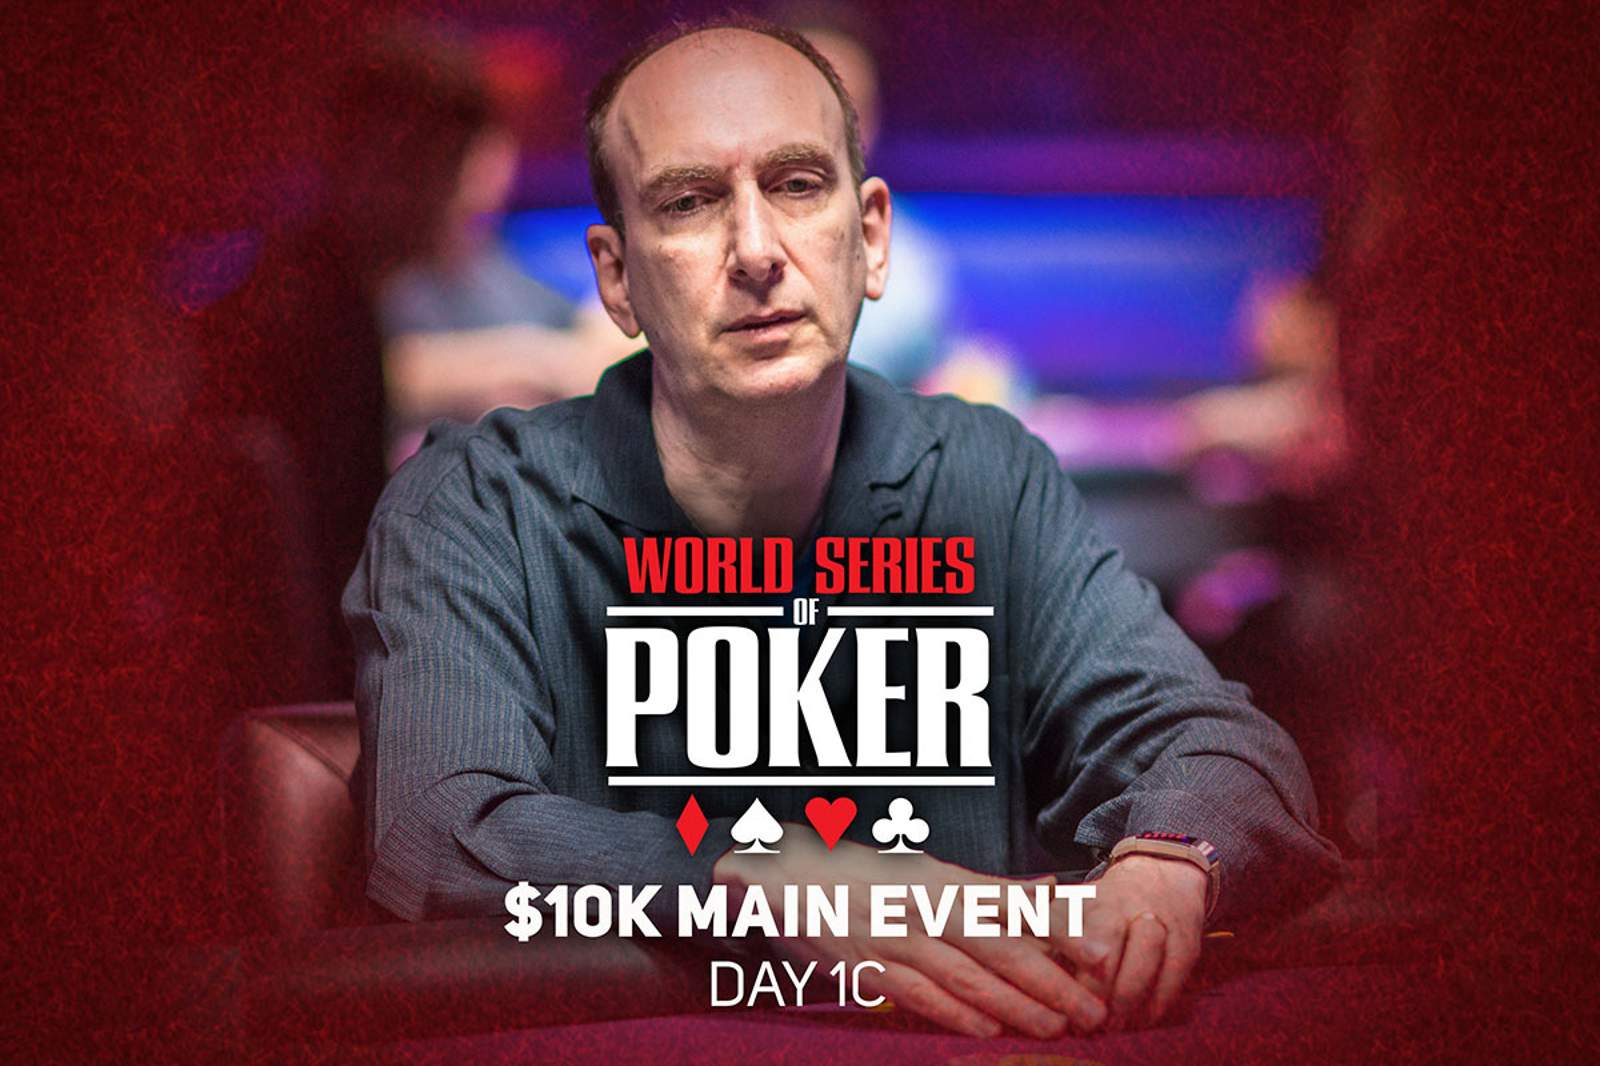 Watch Day 1C of the 2021 WSOP Main Event on PokerGO.com at 11 p.m. ET